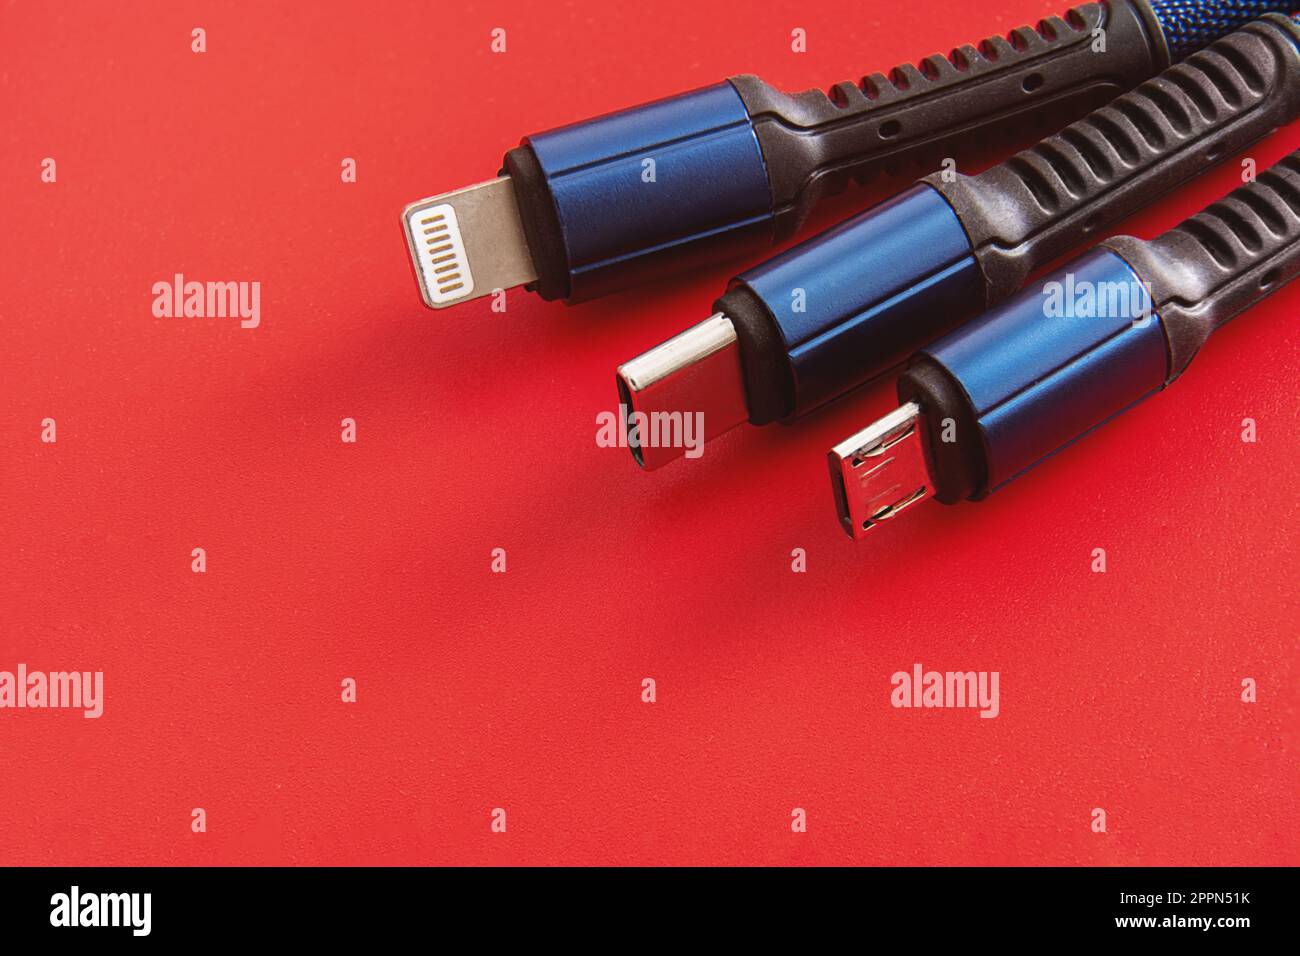 'USB Cables on Red Background' - A close-up of USB-C, lightning, and micro USB cables with black and blue colors on a red background. Stock Photo